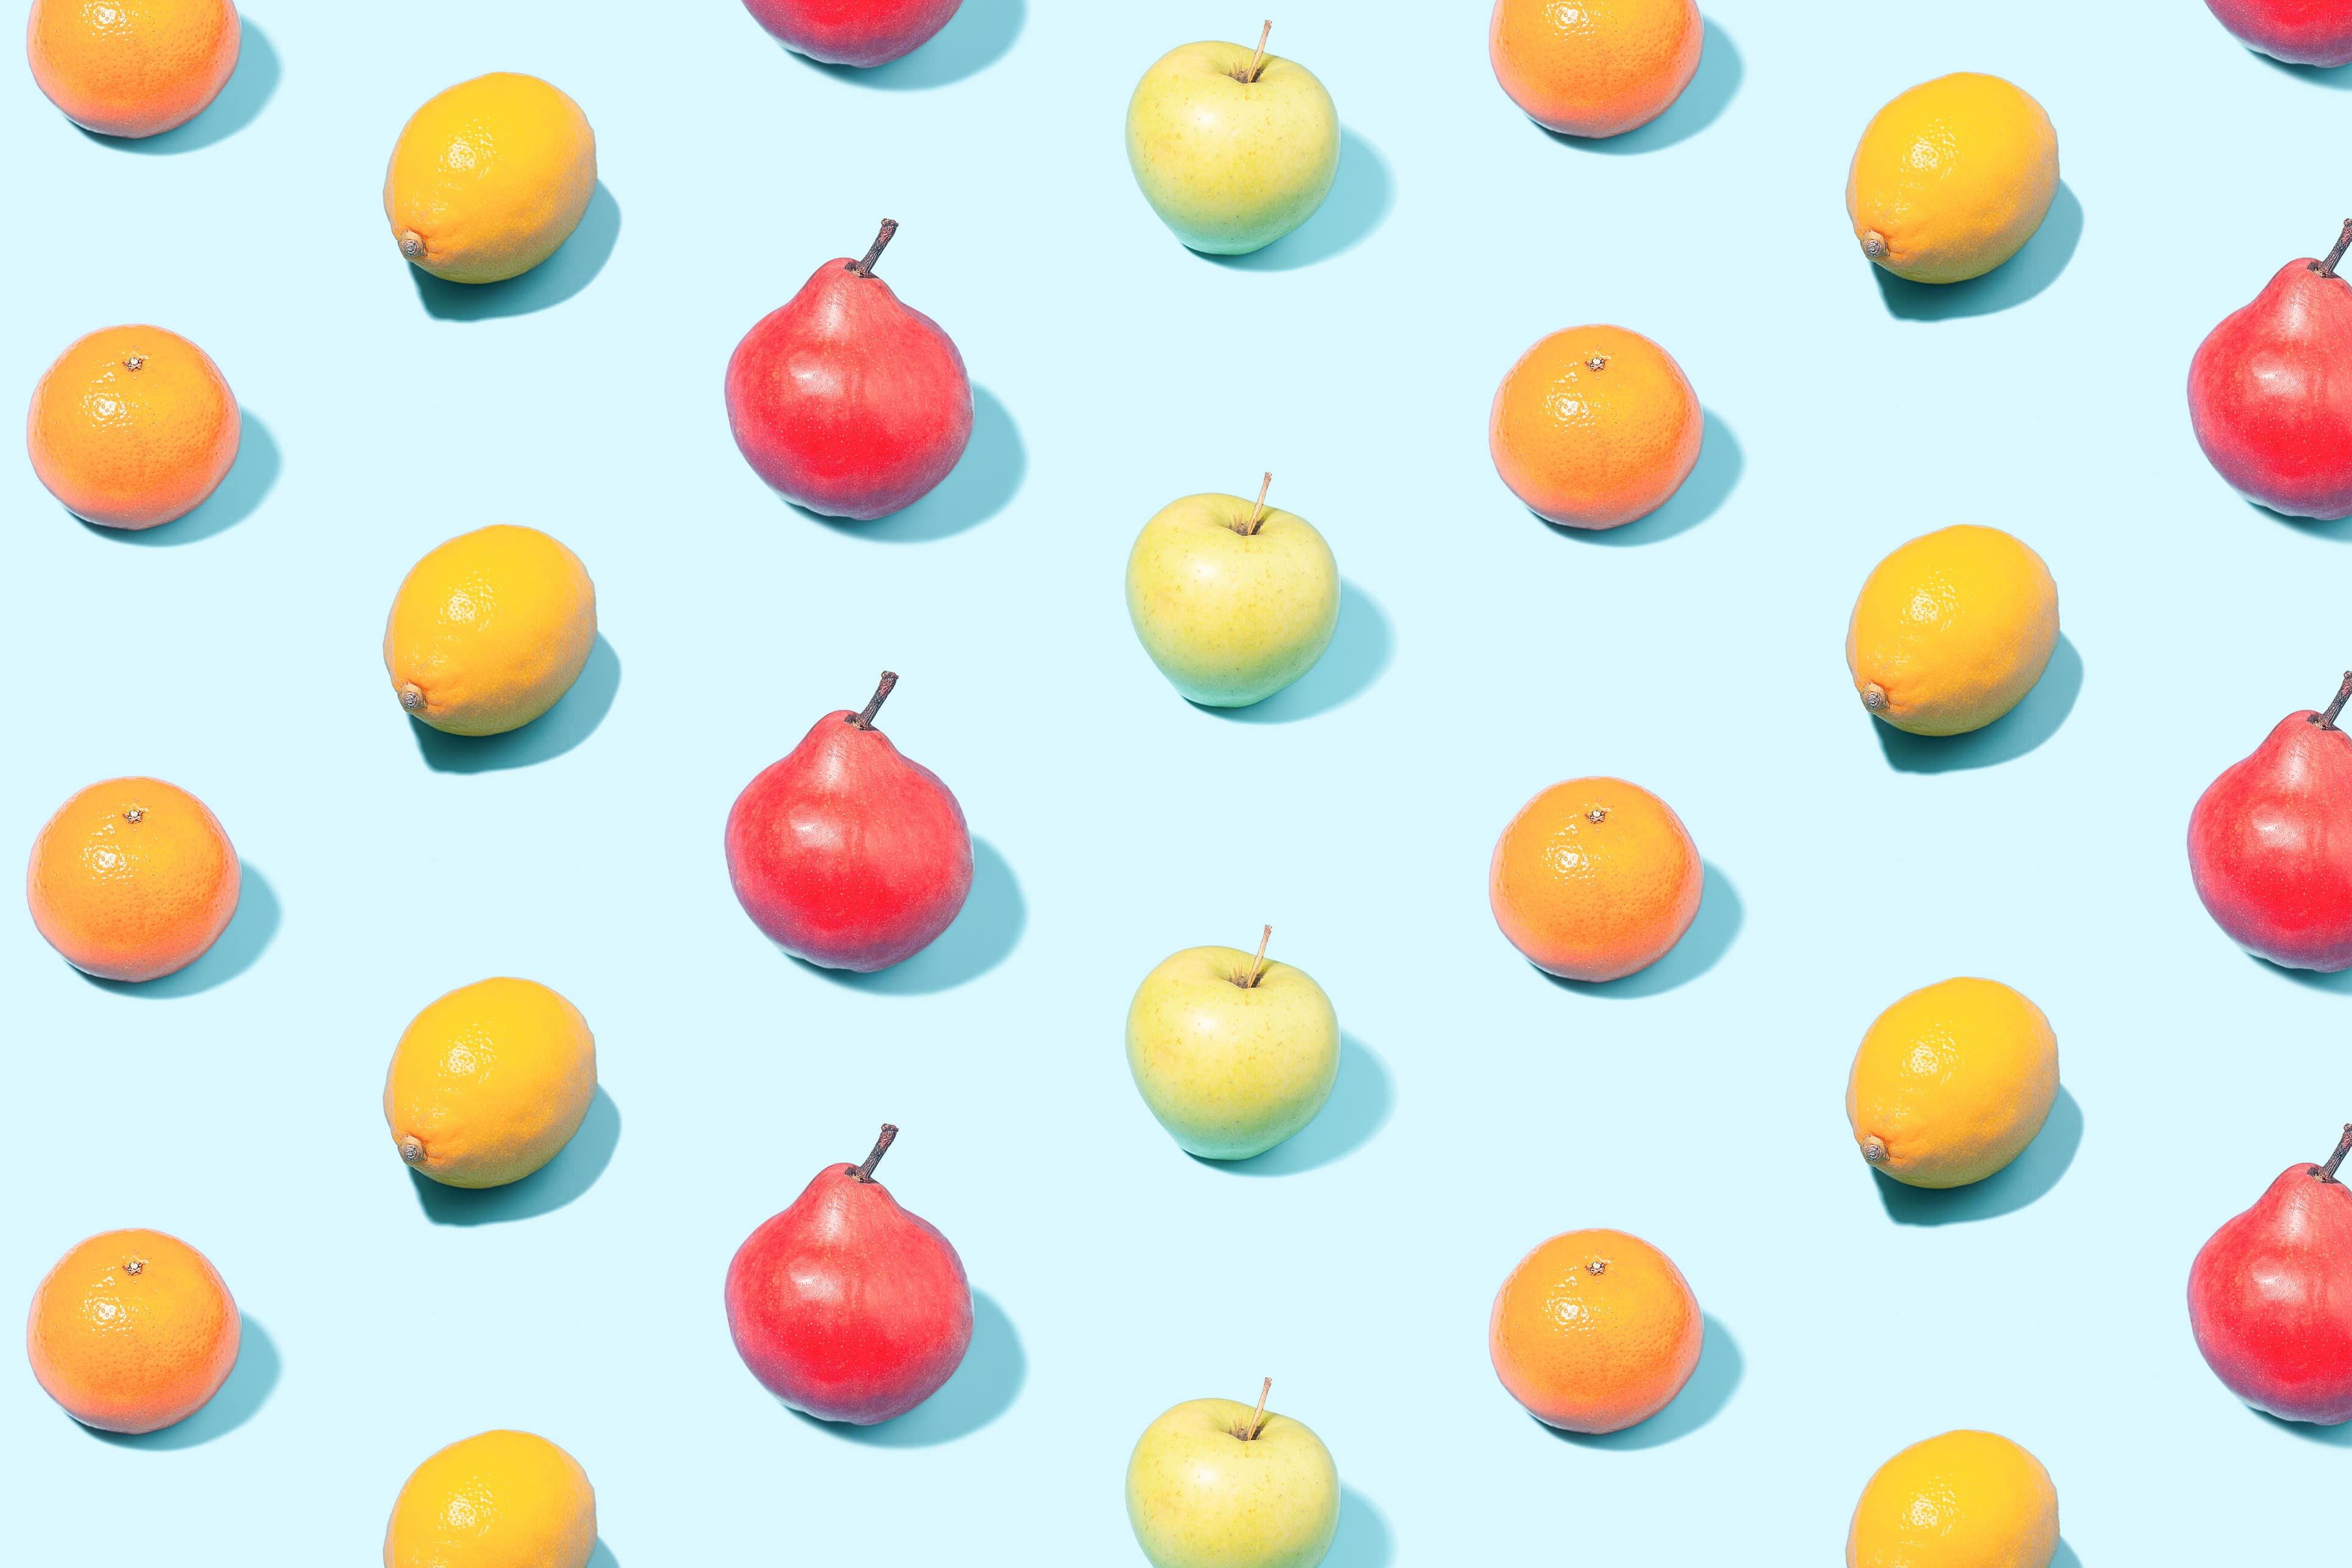 turning-data-into-insights-starts-with-knowing-the-difference-between-apples-and-oranges-data-insights